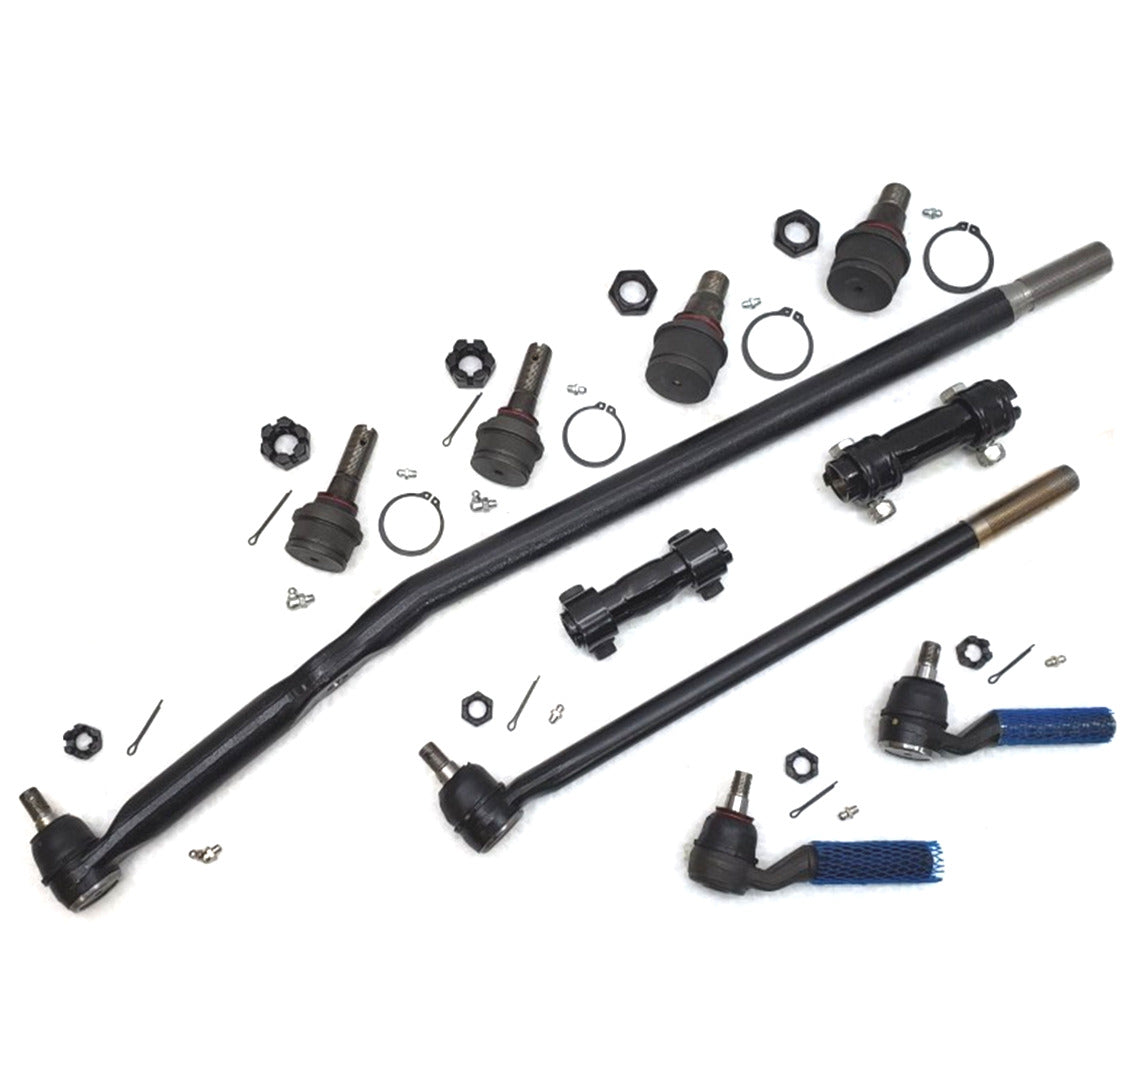 HD Ball Joint Tie Rod Drag Link Sleeve Steering Kit for 1995-1996 Ford F250 4x4, 4600lb axle